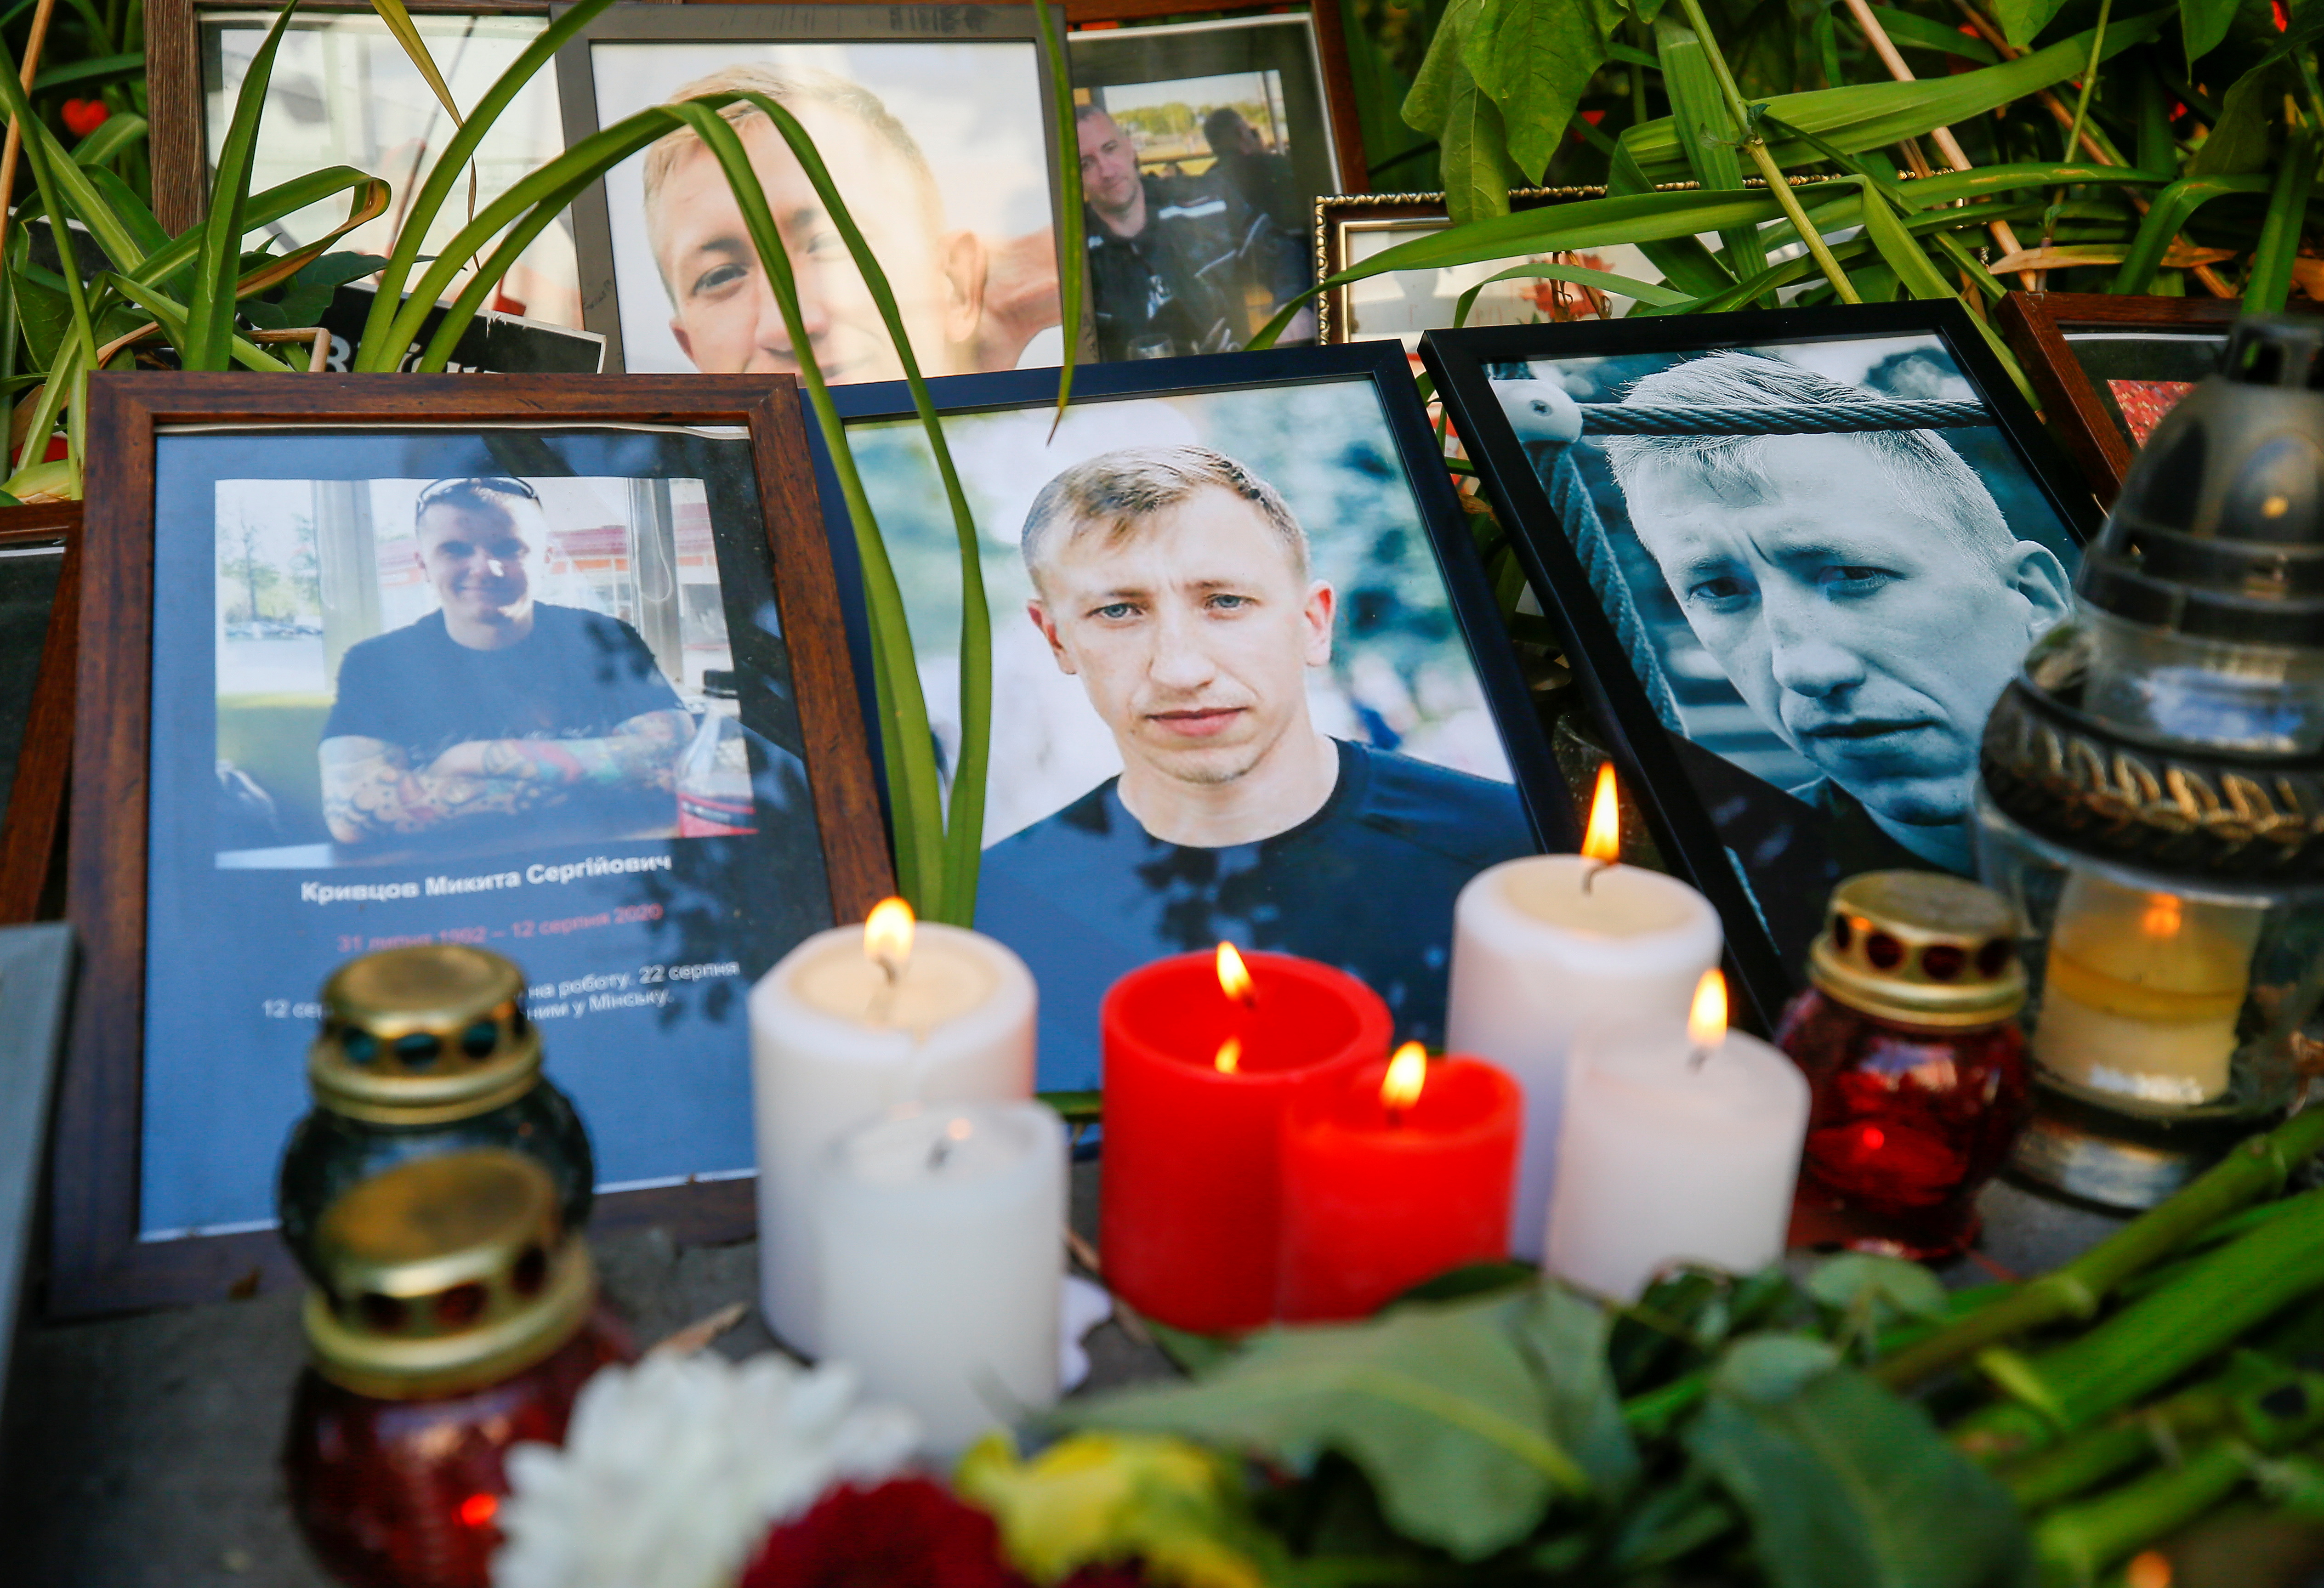 Makeshift memorial for Vitaly Shishov, a Belarusian activist living in exile who was found hanged in a park near his home in Kyiv